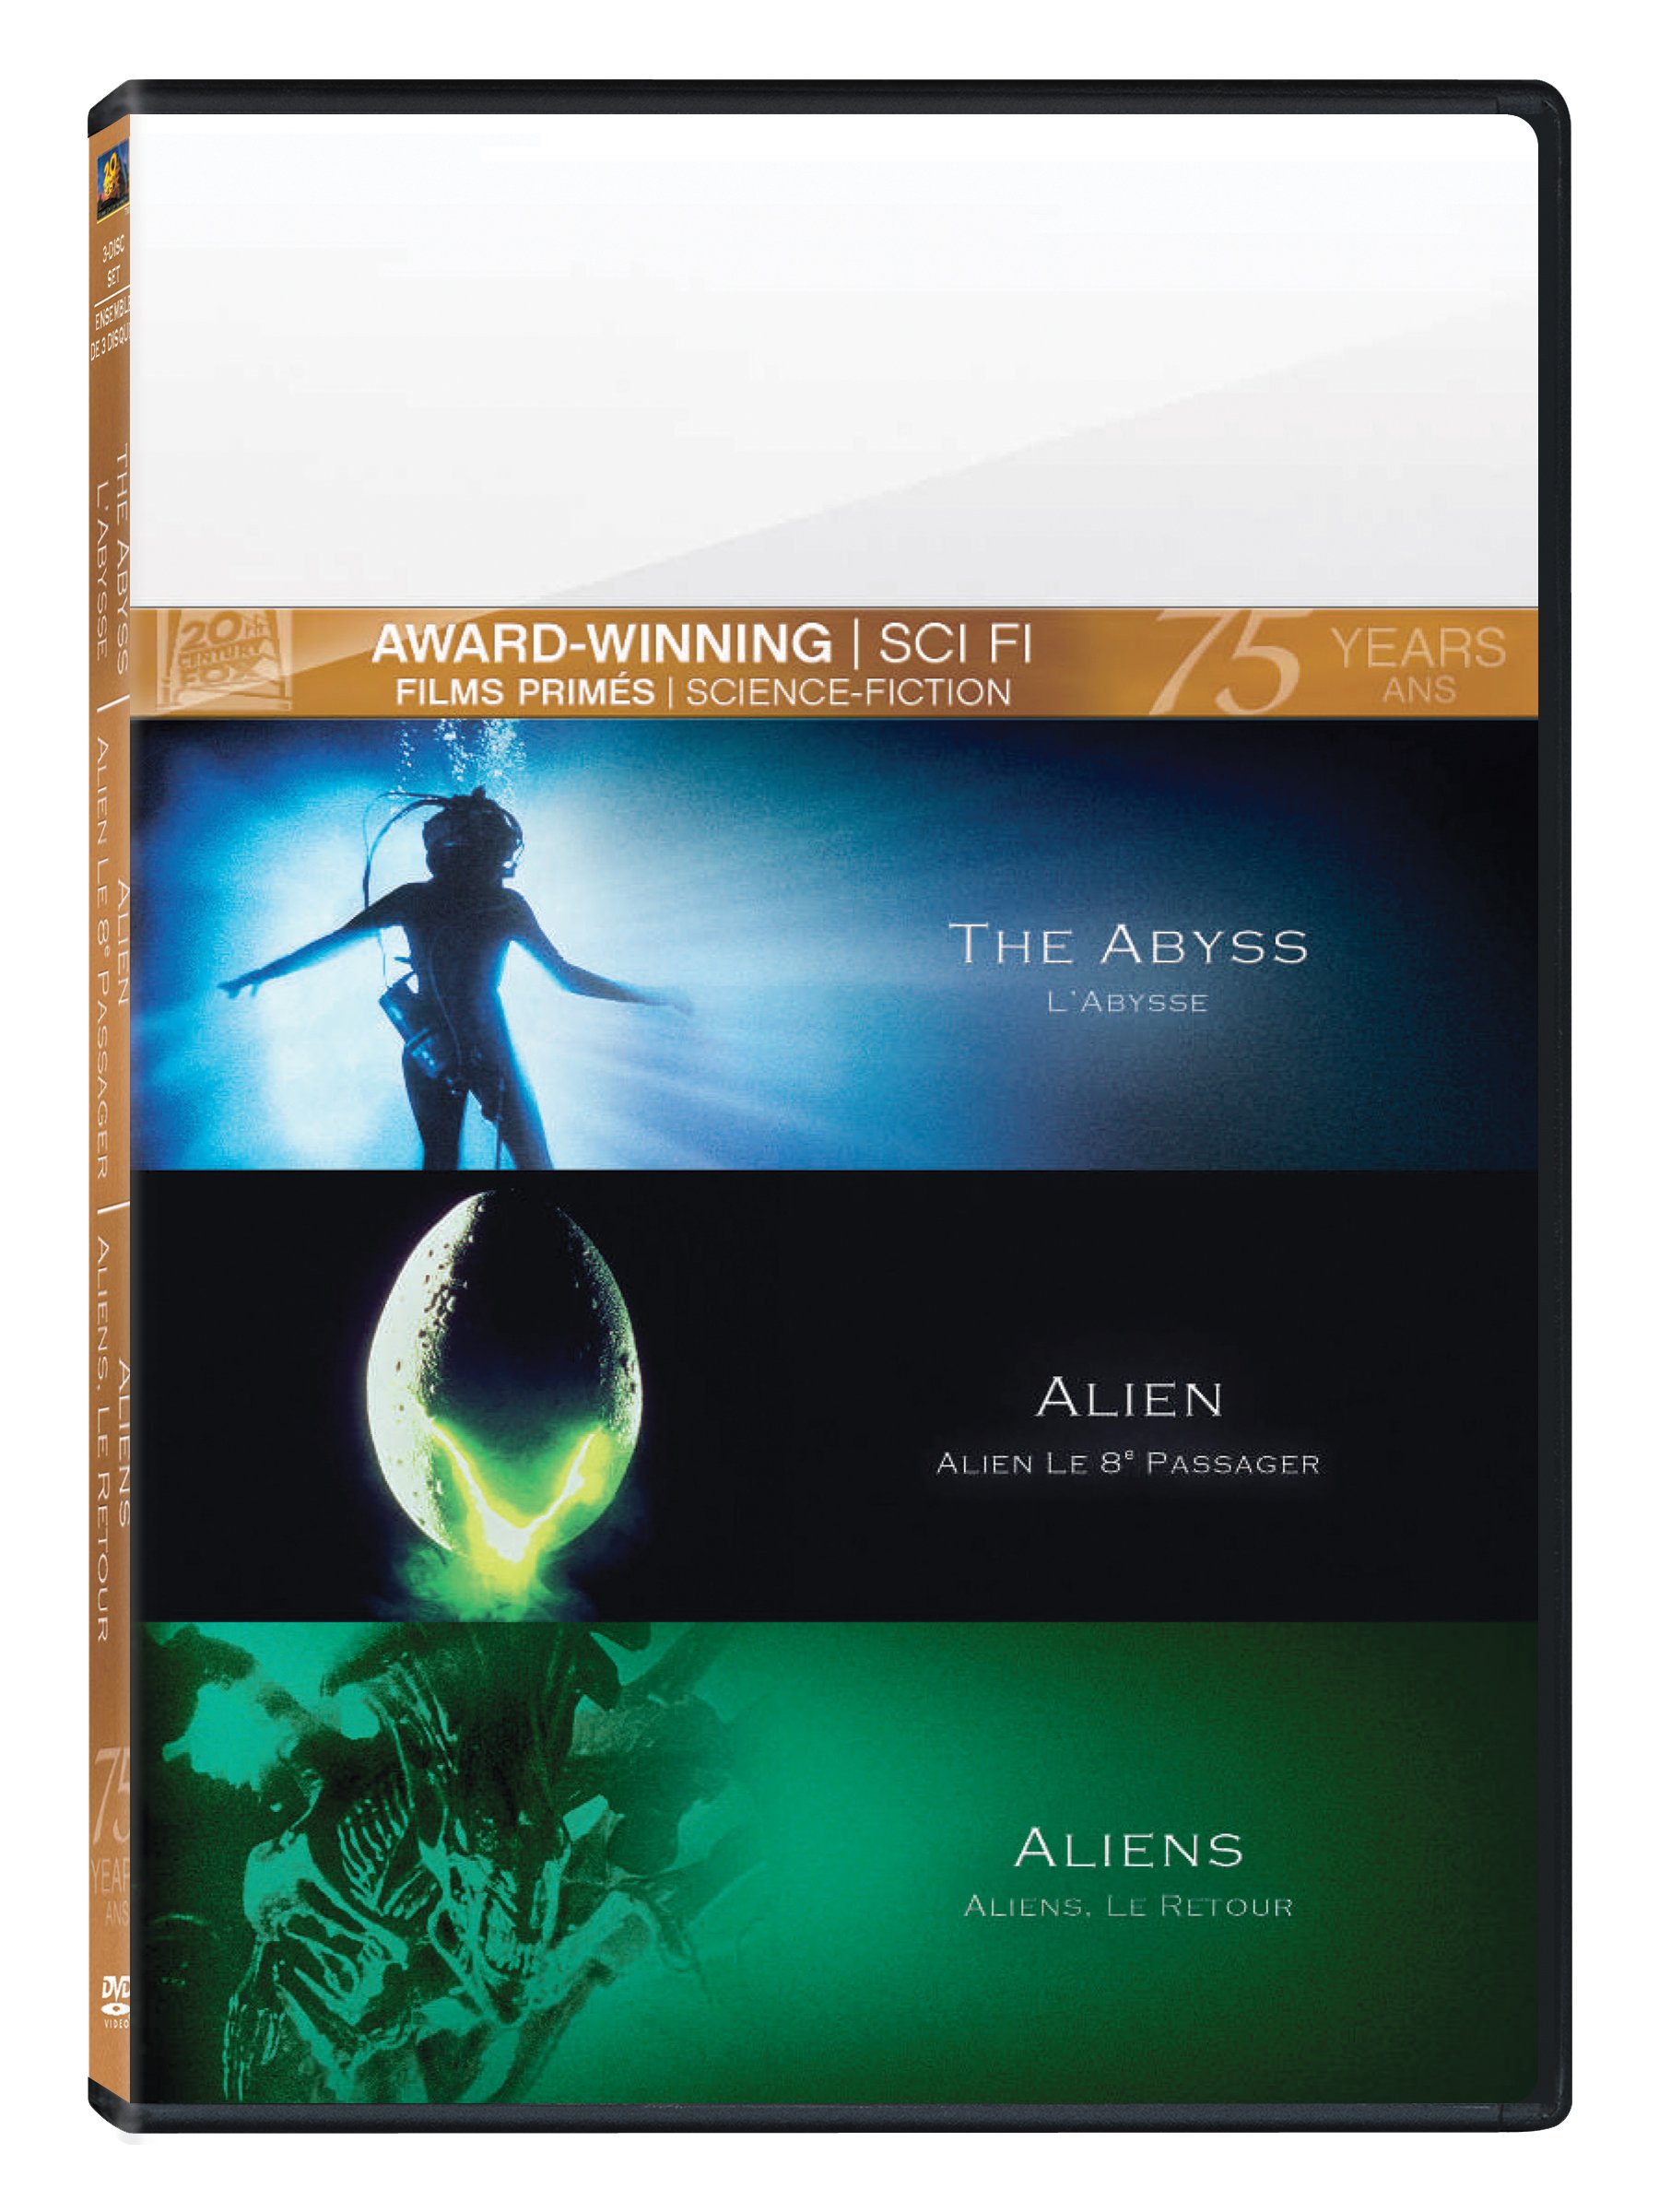 award-winning-sci-fi-collection-3-movies-the-abyss-alien-aliens-3-disc-box-set